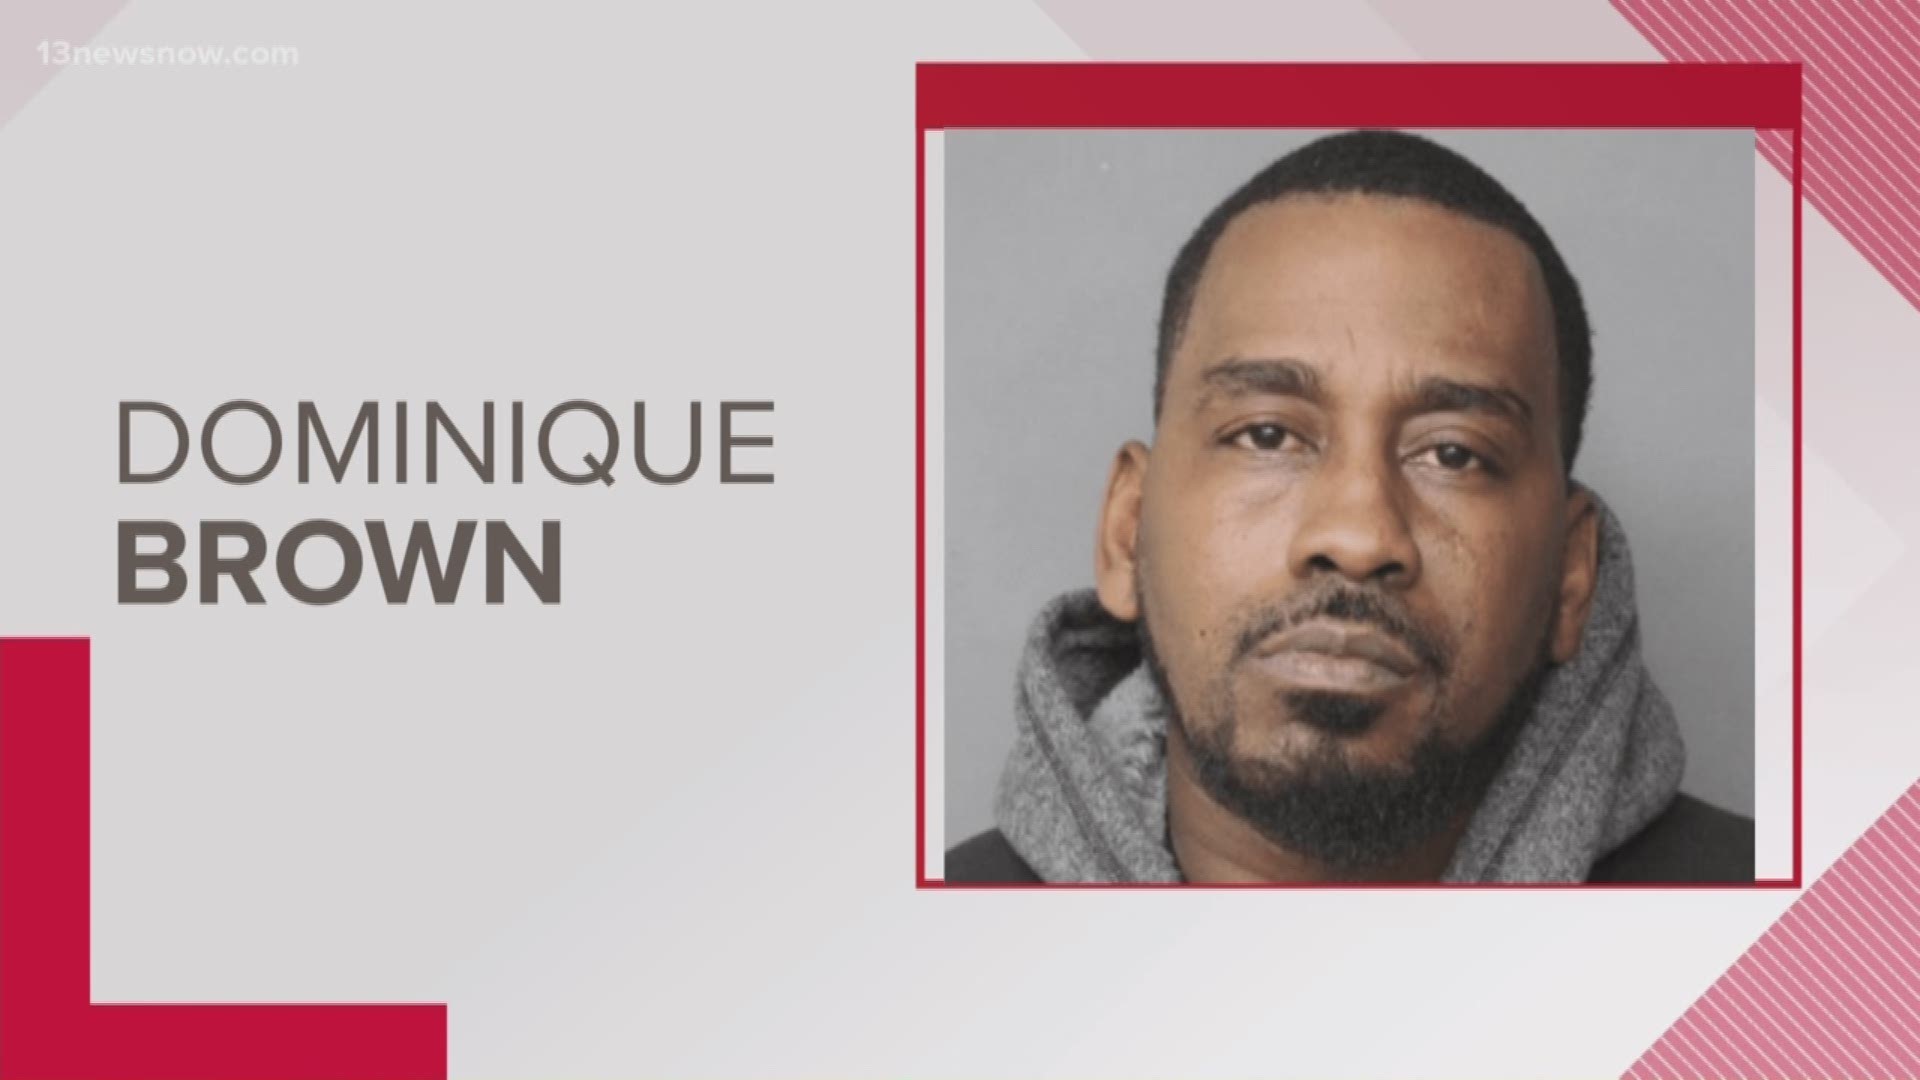 Dominique Brown, 41, was arrested after taking a woman hostage which prompted a barricade situation at a home on Wellington Street in Norfolk.